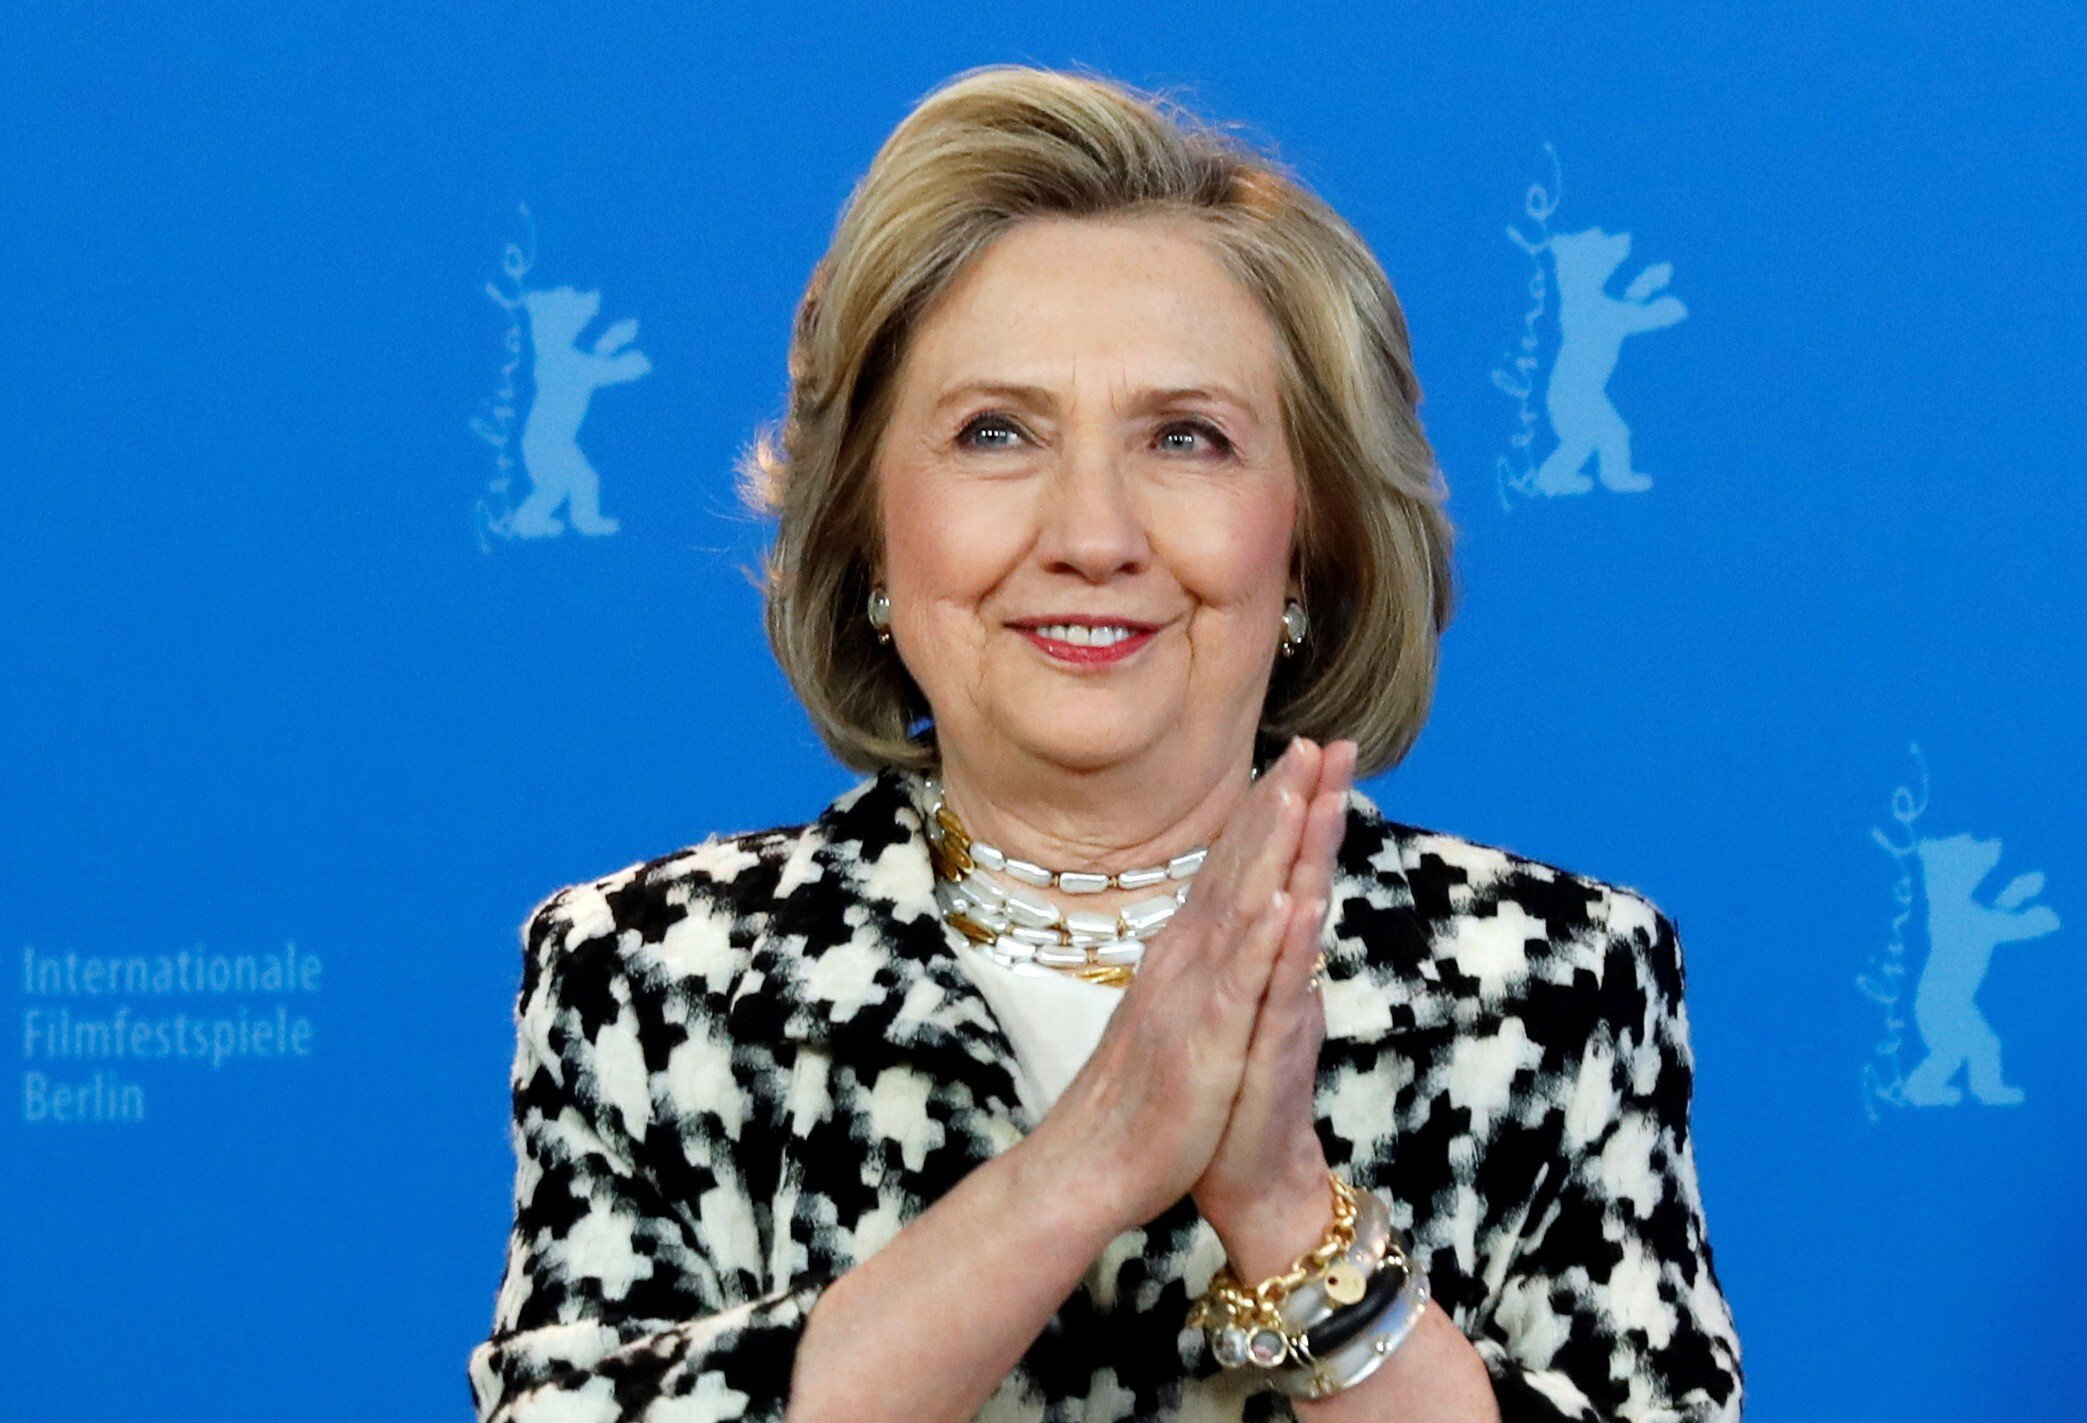 Former US secretary of state Hillary Clinton attends a photo call to promote the movie “Hillary” during the 70th Berlinale International Film Festival in Berlin in February. Photo: Reuters